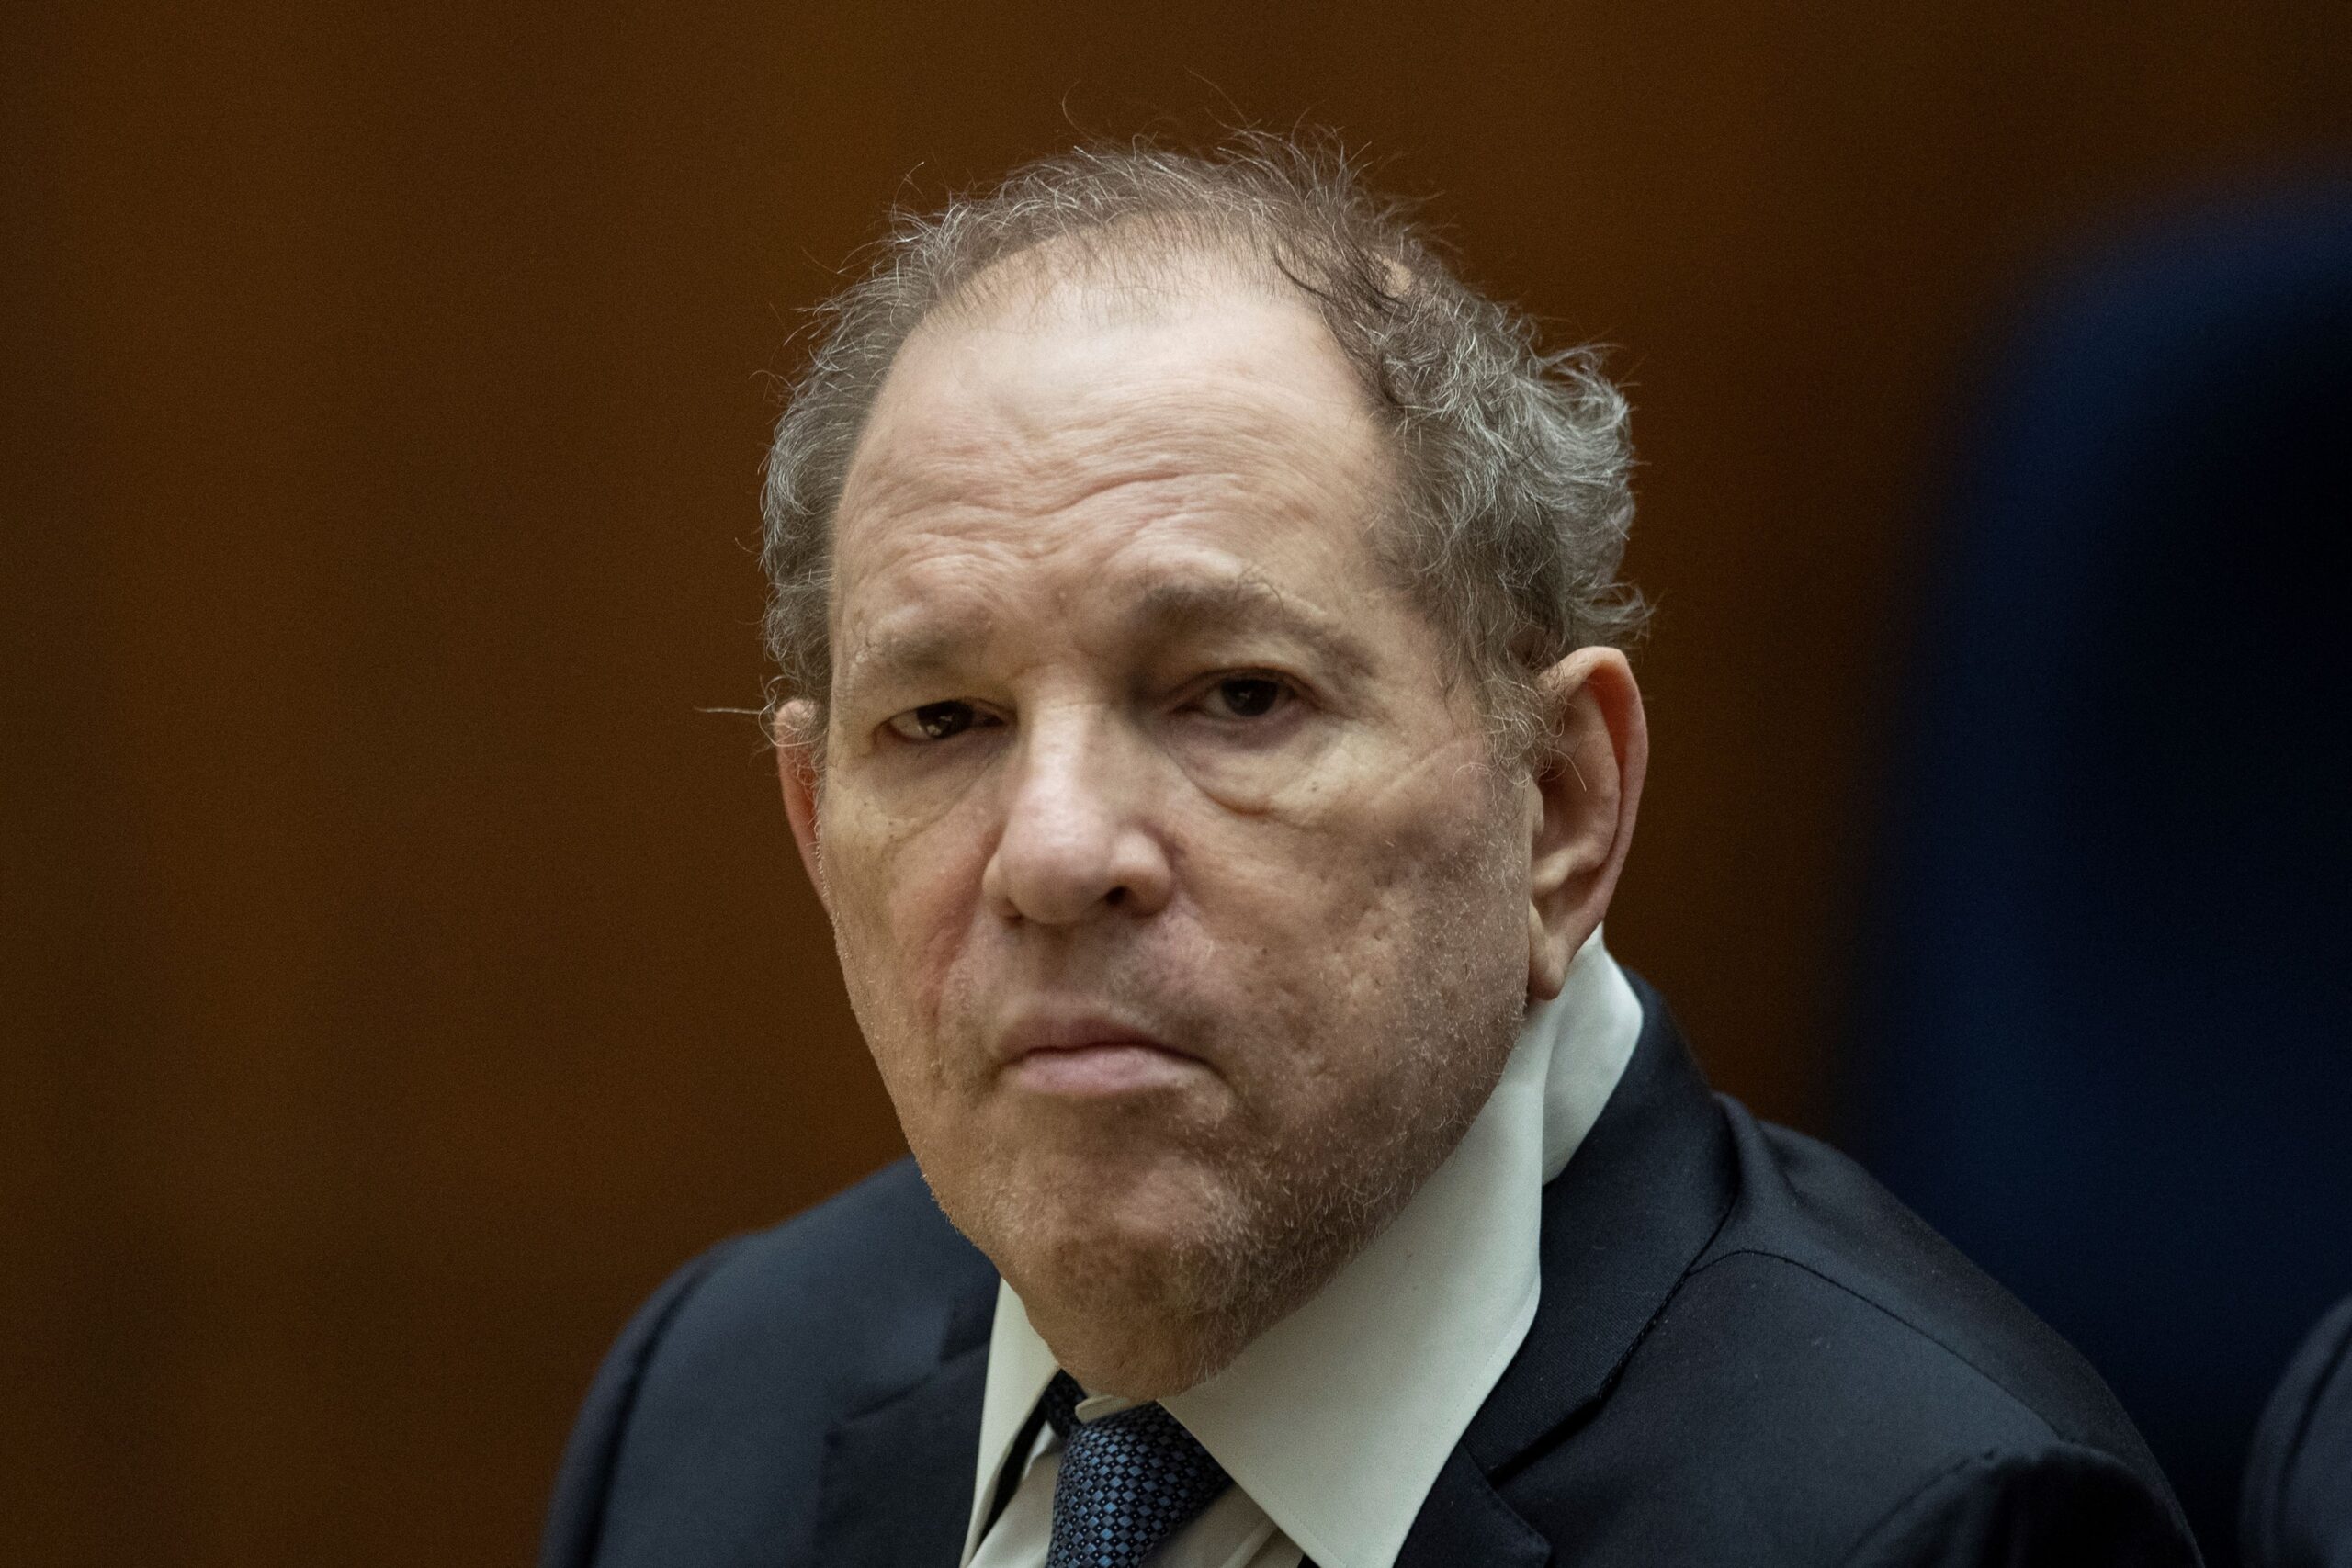 (FILES) Former film producer Harvey Weinstein appears in court at the Clara Shortridge Foltz Criminal Justice Center in Los Angeles, California, on October 4, 2022.  New York's highest court on April 25, 2024, overturned Hollywood producer Weinstein's 2020 conviction on sex crime charges and ordered a new trial. In their decision, judges cited errors in the way the trial had been conducted, including admitting the testimony of women who were not part of the charges against him. "Order reversed and a new trial ordered," the judges wrote.,Image: 867836165, License: Rights-managed, Restrictions: , Model Release: no, Credit line: ETIENNE LAURENT / AFP / Profimedia